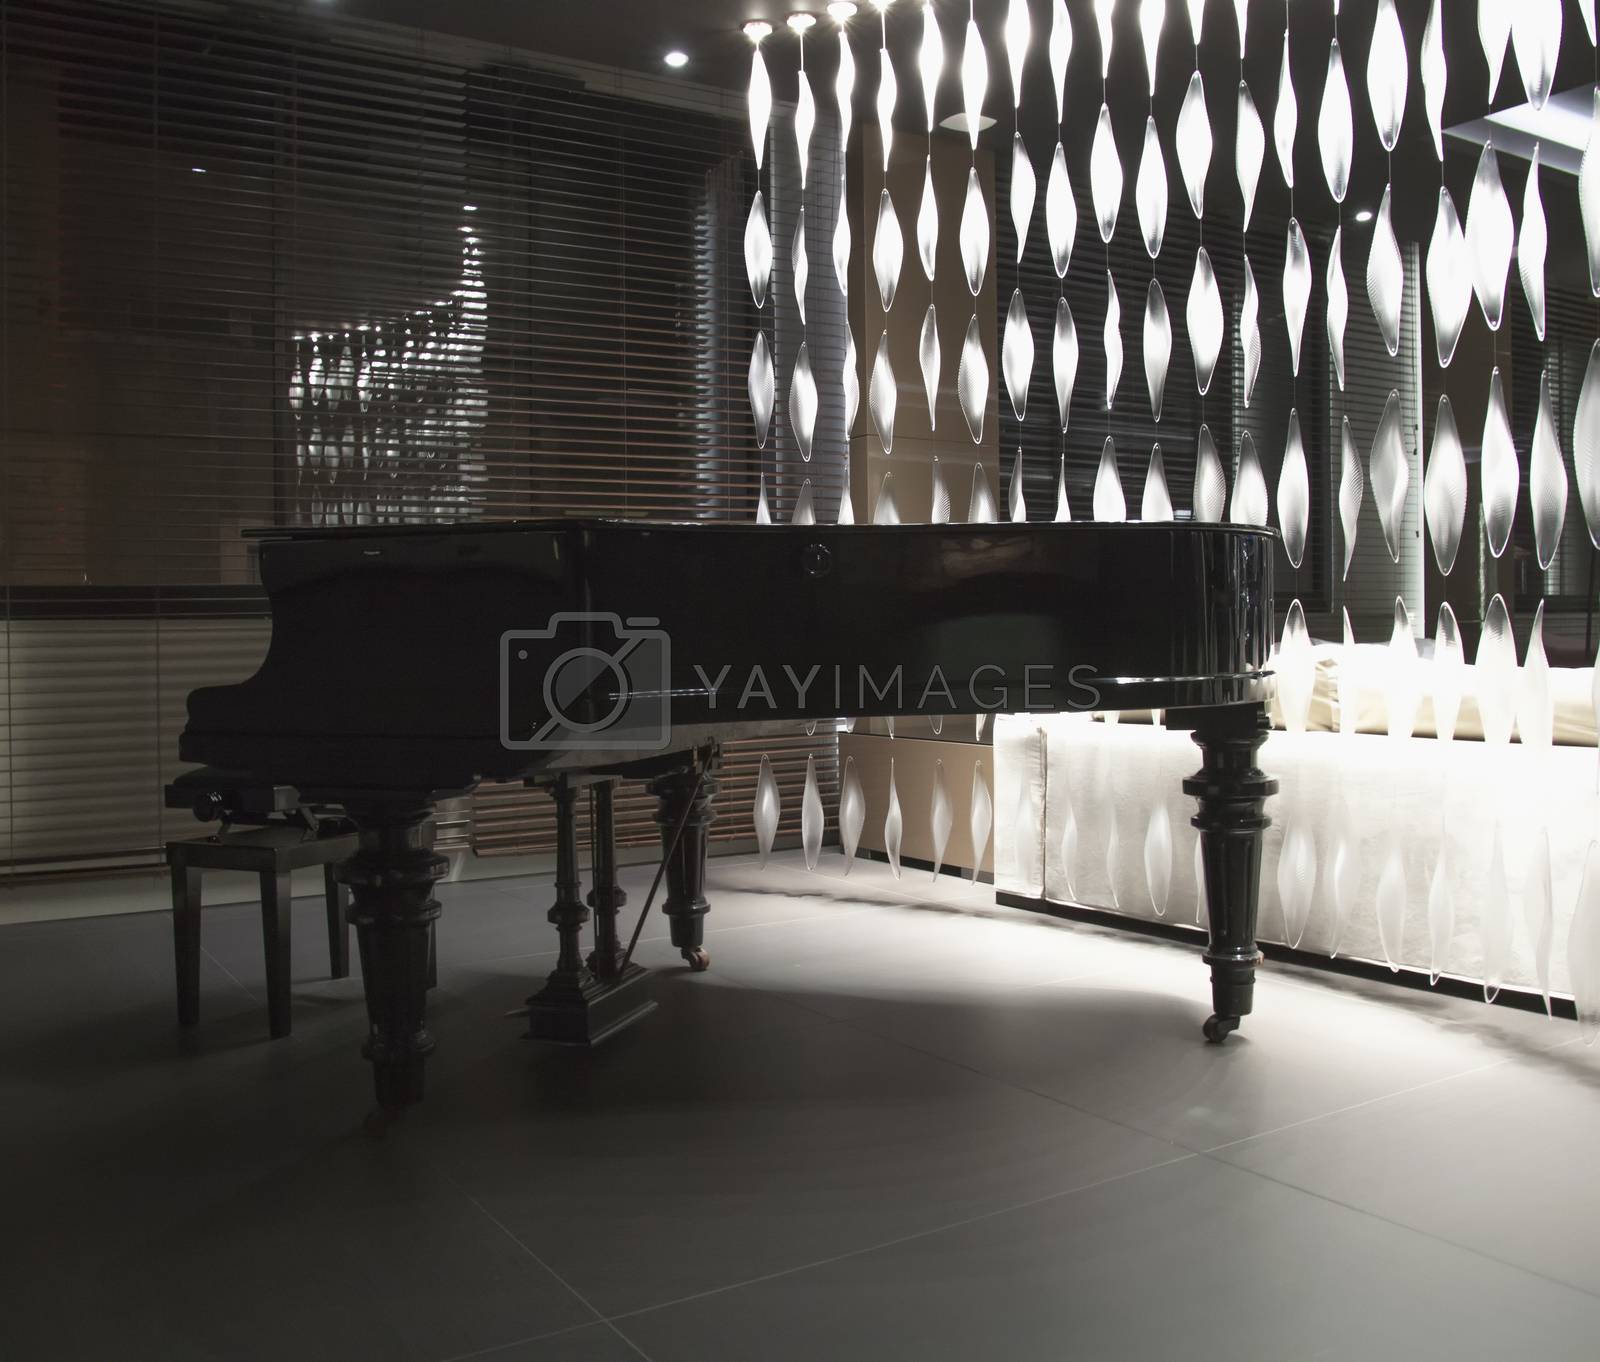 Royalty free image of Piano by Koufax73